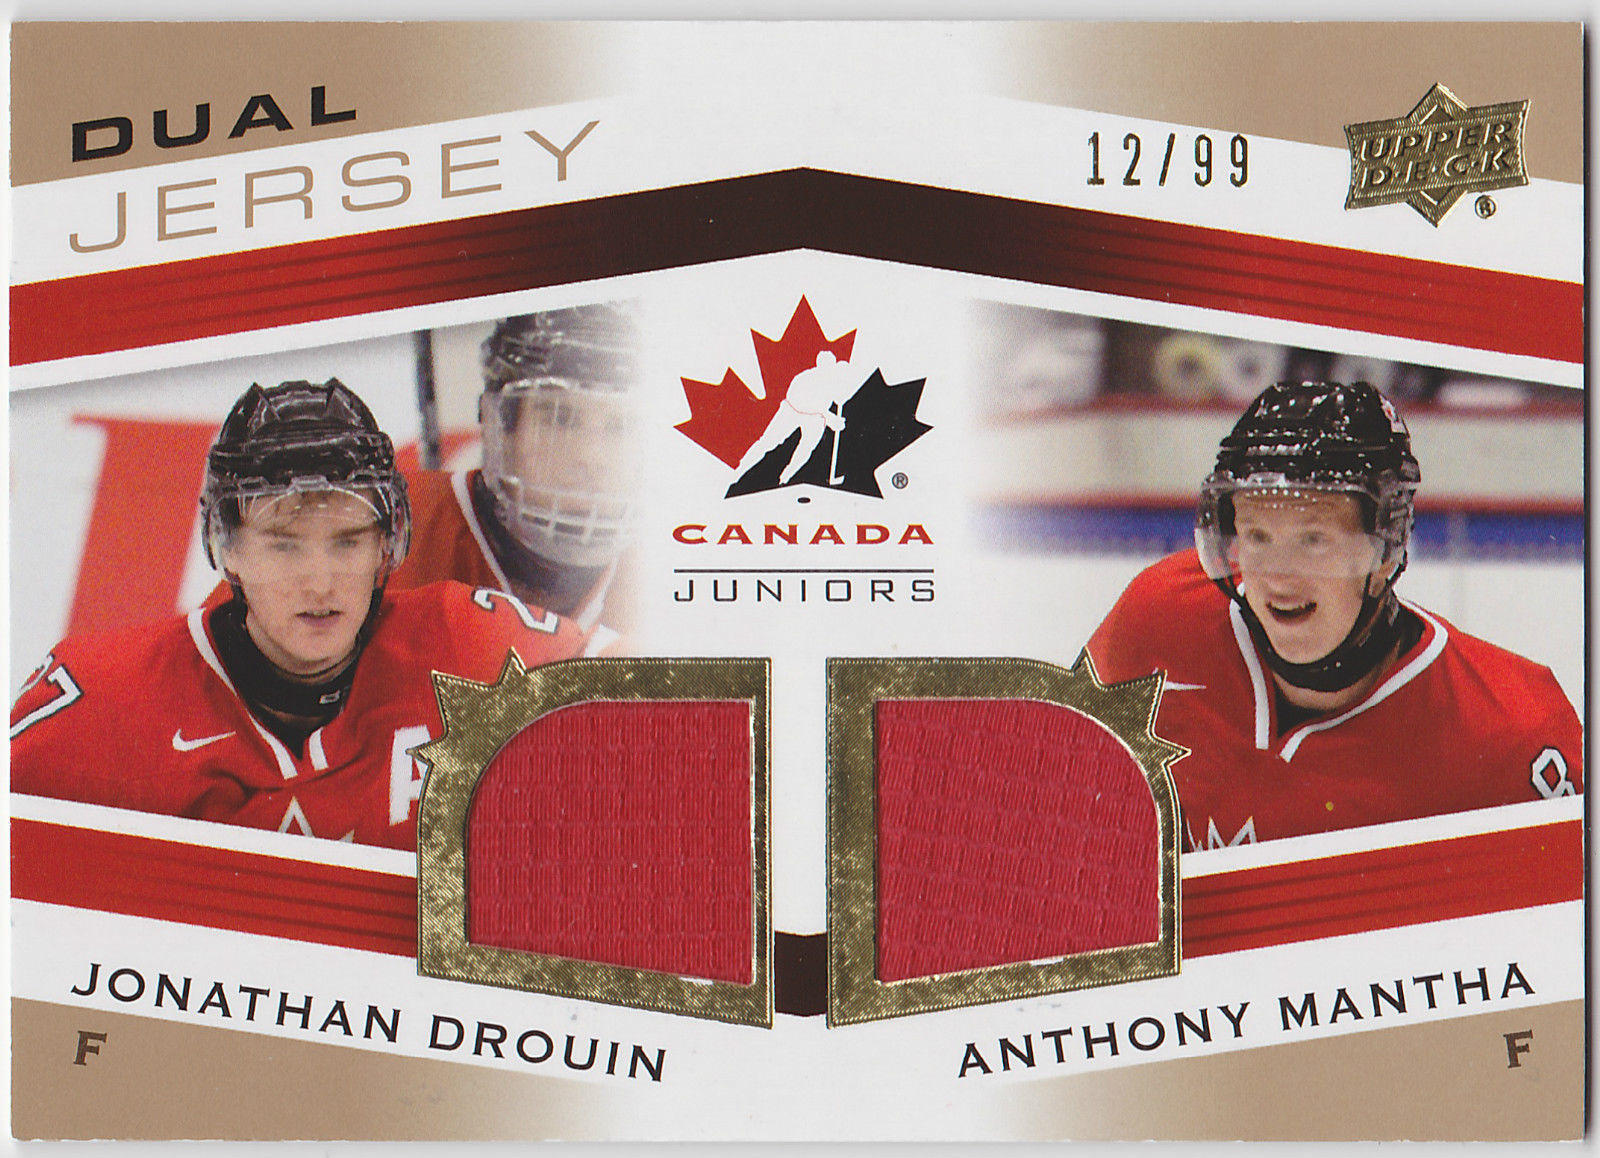 Primary image for 2014-15 Upper Deck Team Canada Juniors Dual Jerseys Gold Drouin/Mantha 12/99